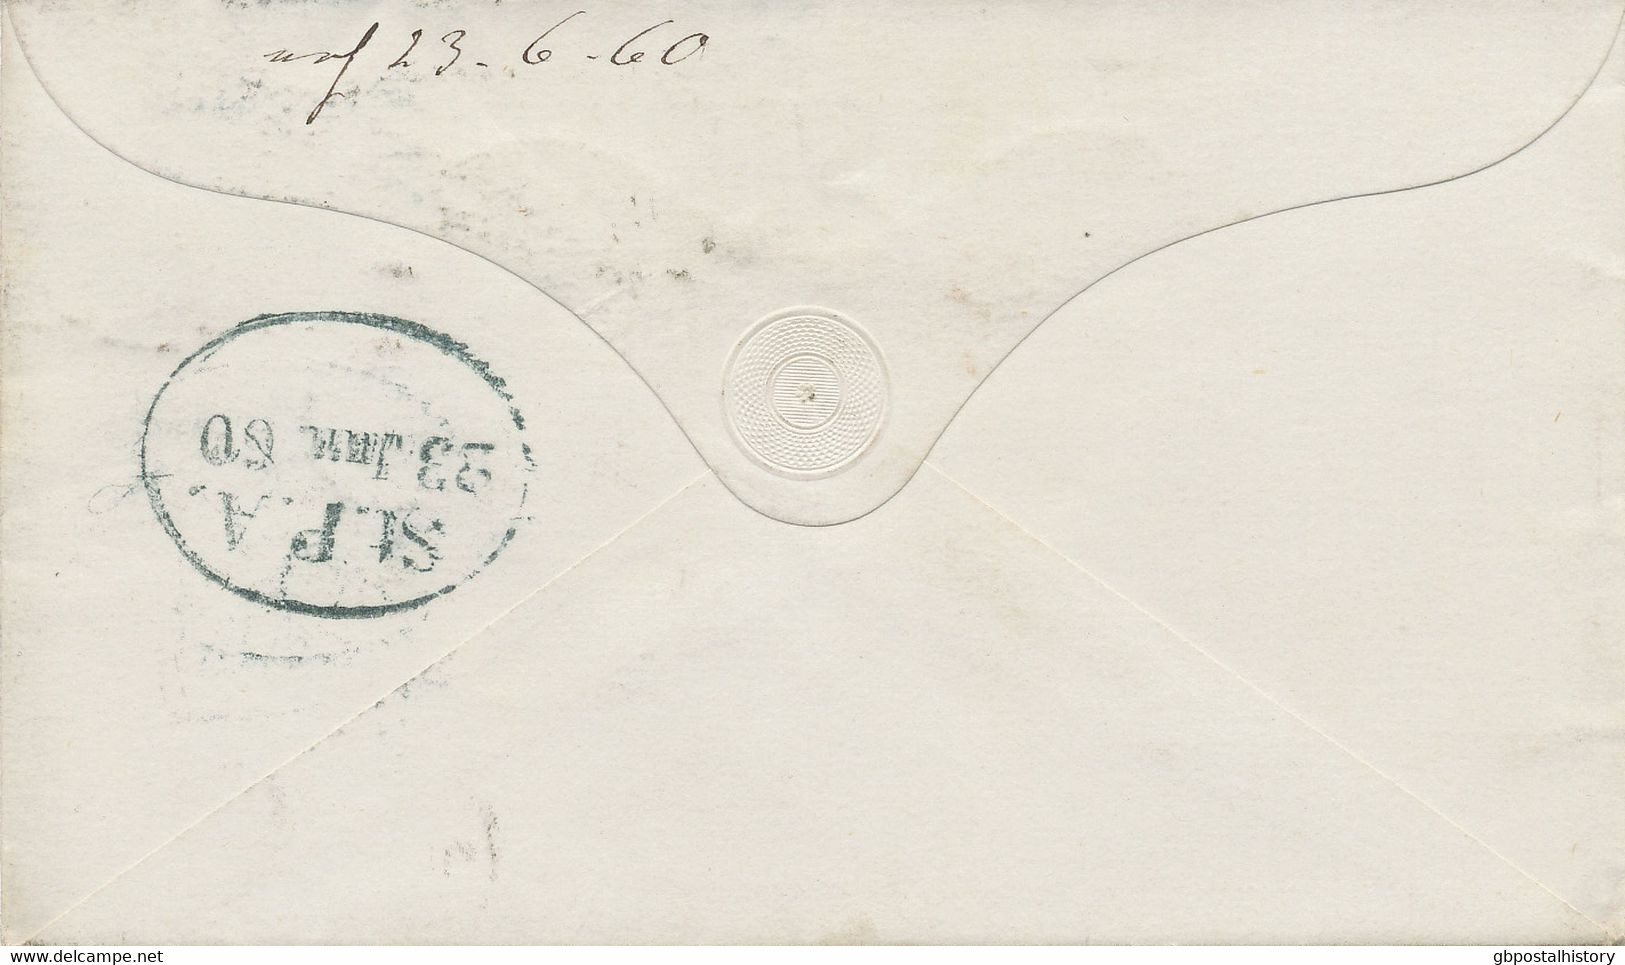 GB 1860 QV TWO PENCE Blue Pl.8 (3x, MA, SD, SE) Extremely Rare Multiple Postage - Covers & Documents